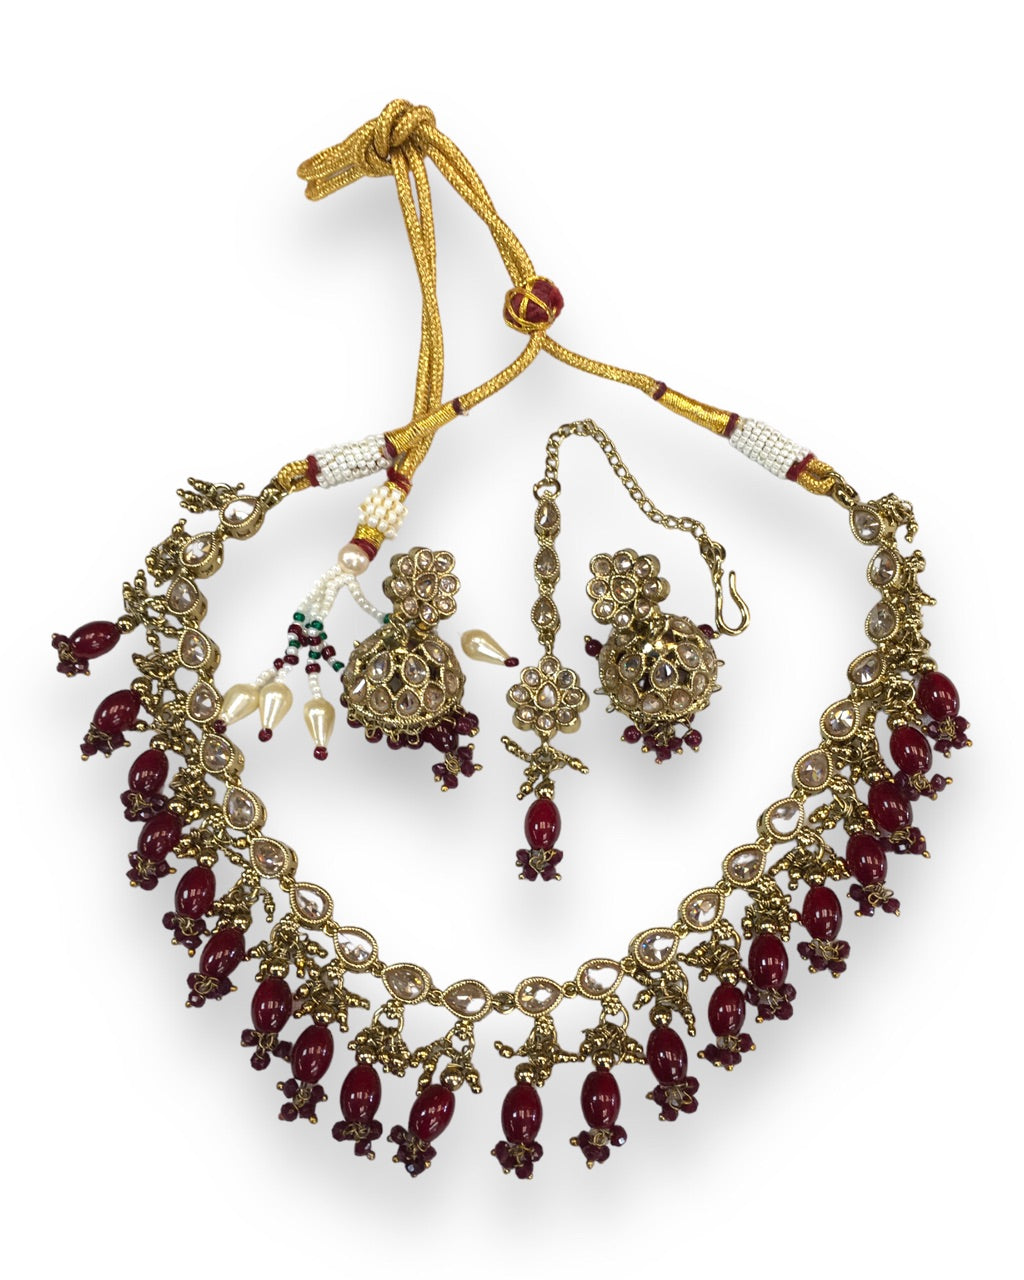 Maroon - Antique Gold Finish Choker Necklace set - Bollywood - Weddings - HB972 KY 0523